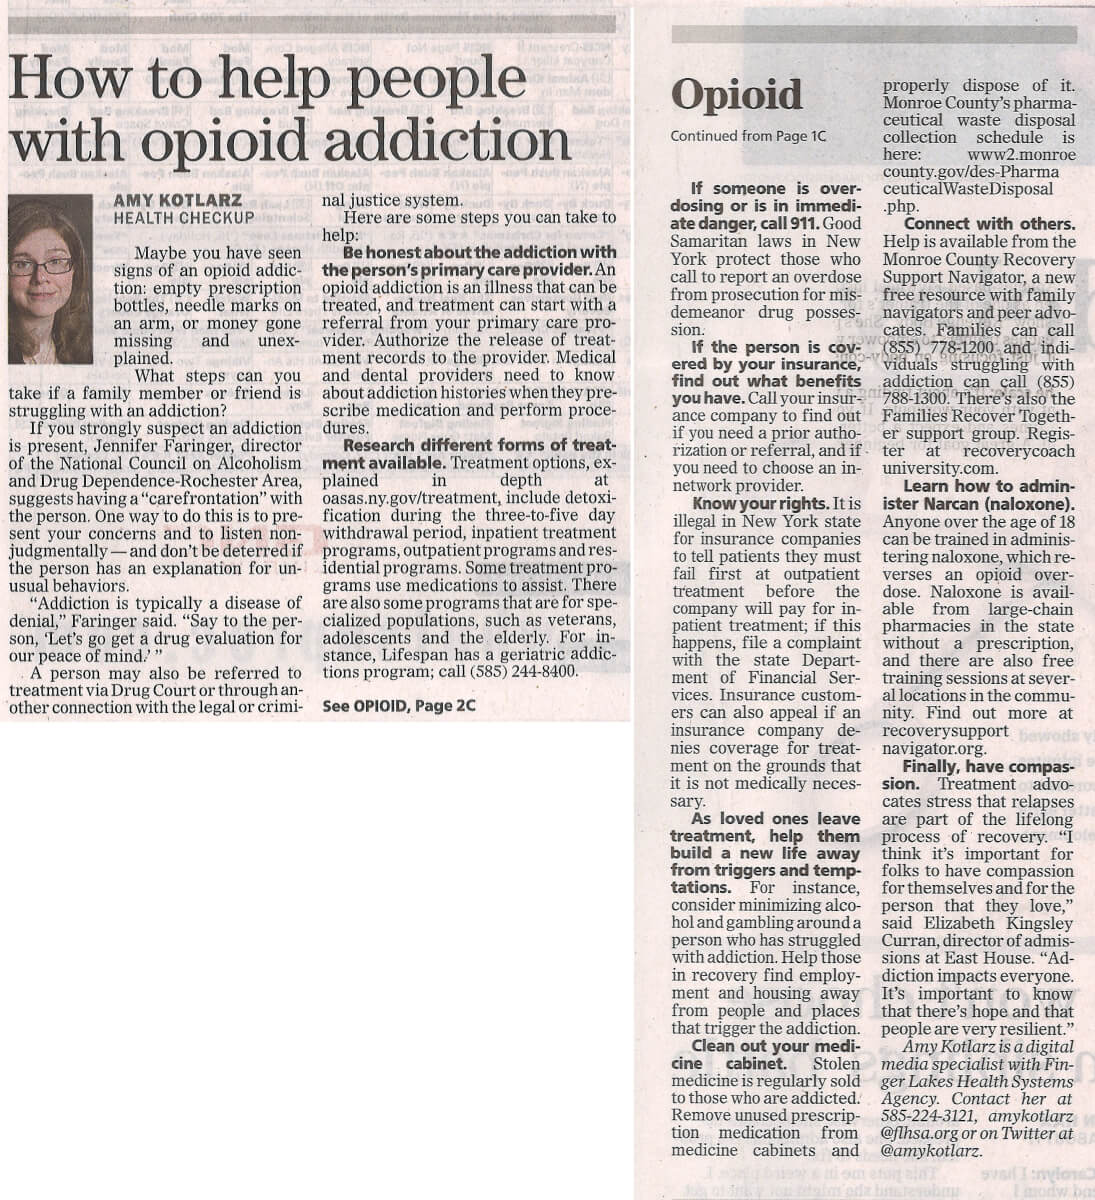 How to Help People with Opioid Addiction, NCADD-RA article in the Democrat and Chronicle December 28, 2016